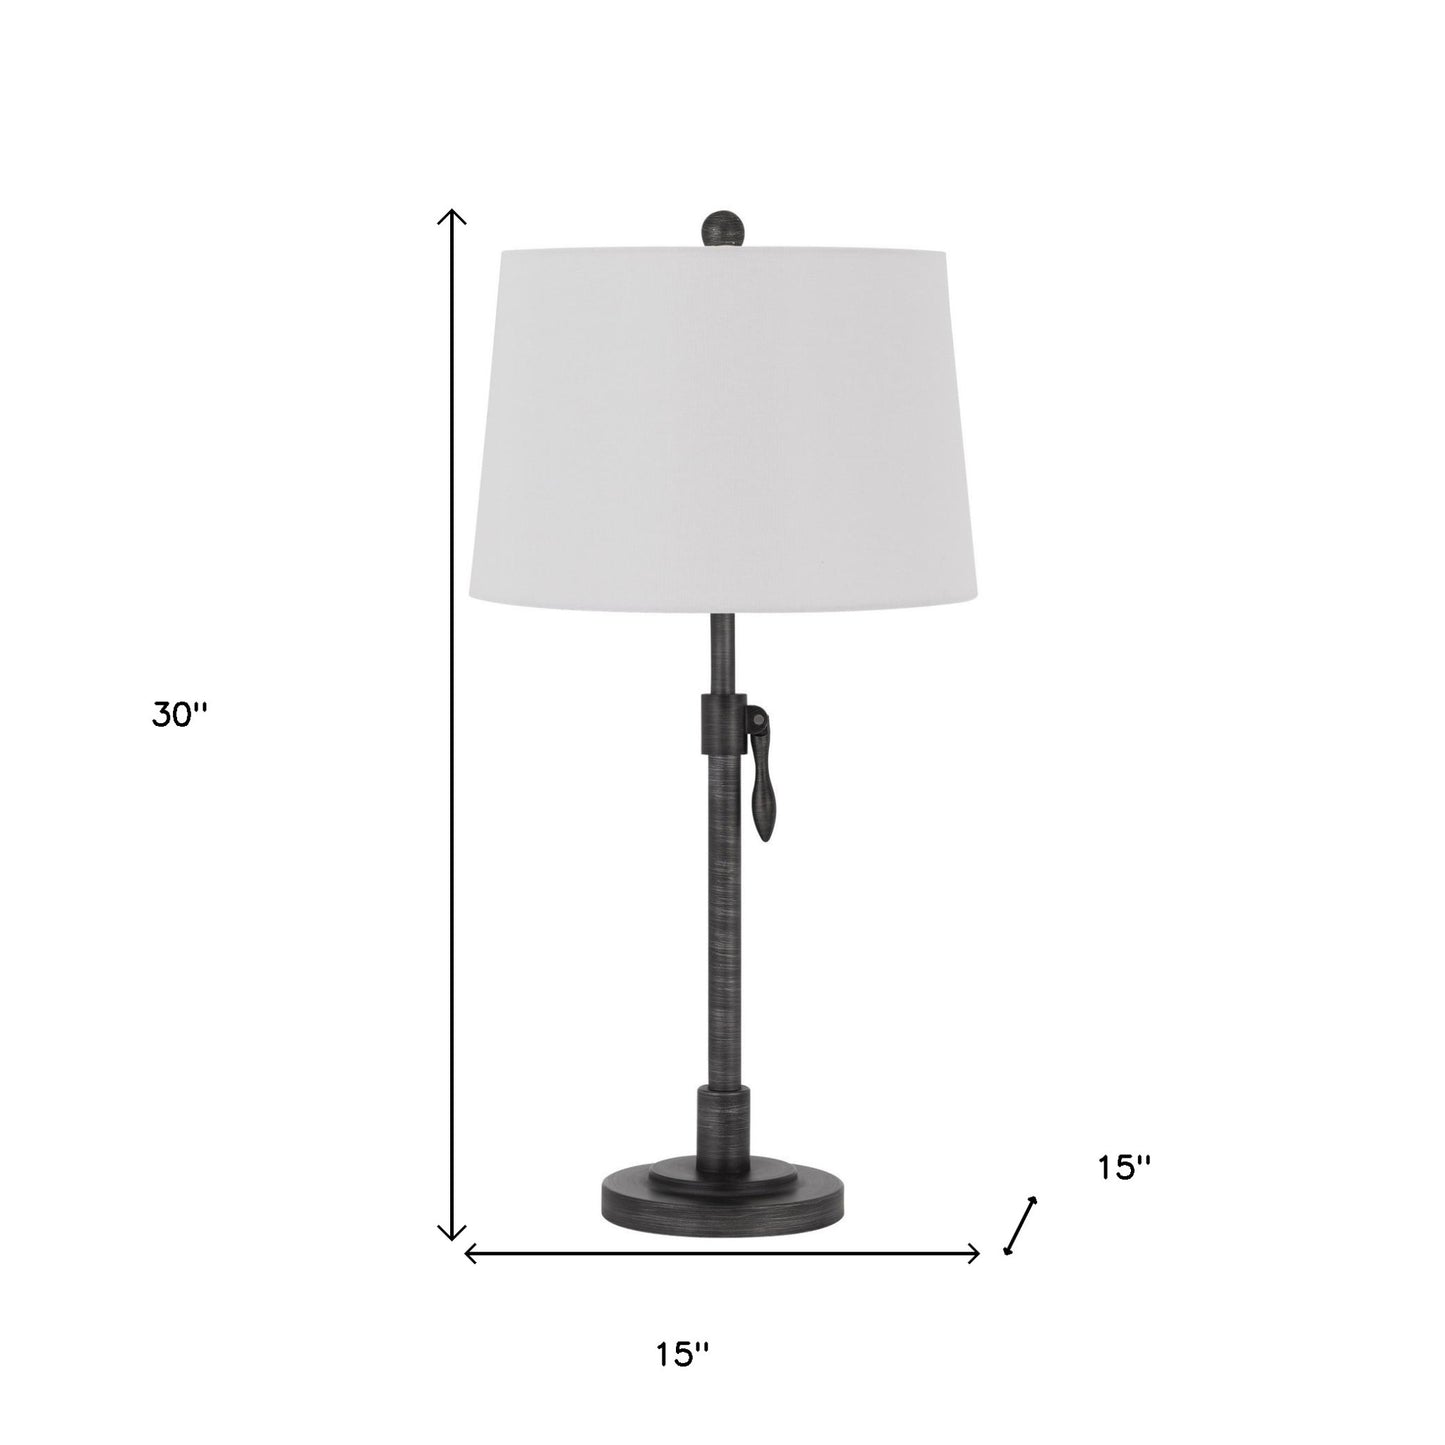 30" Silver Metal Adjustable Table Lamp With Off White Empire Shade